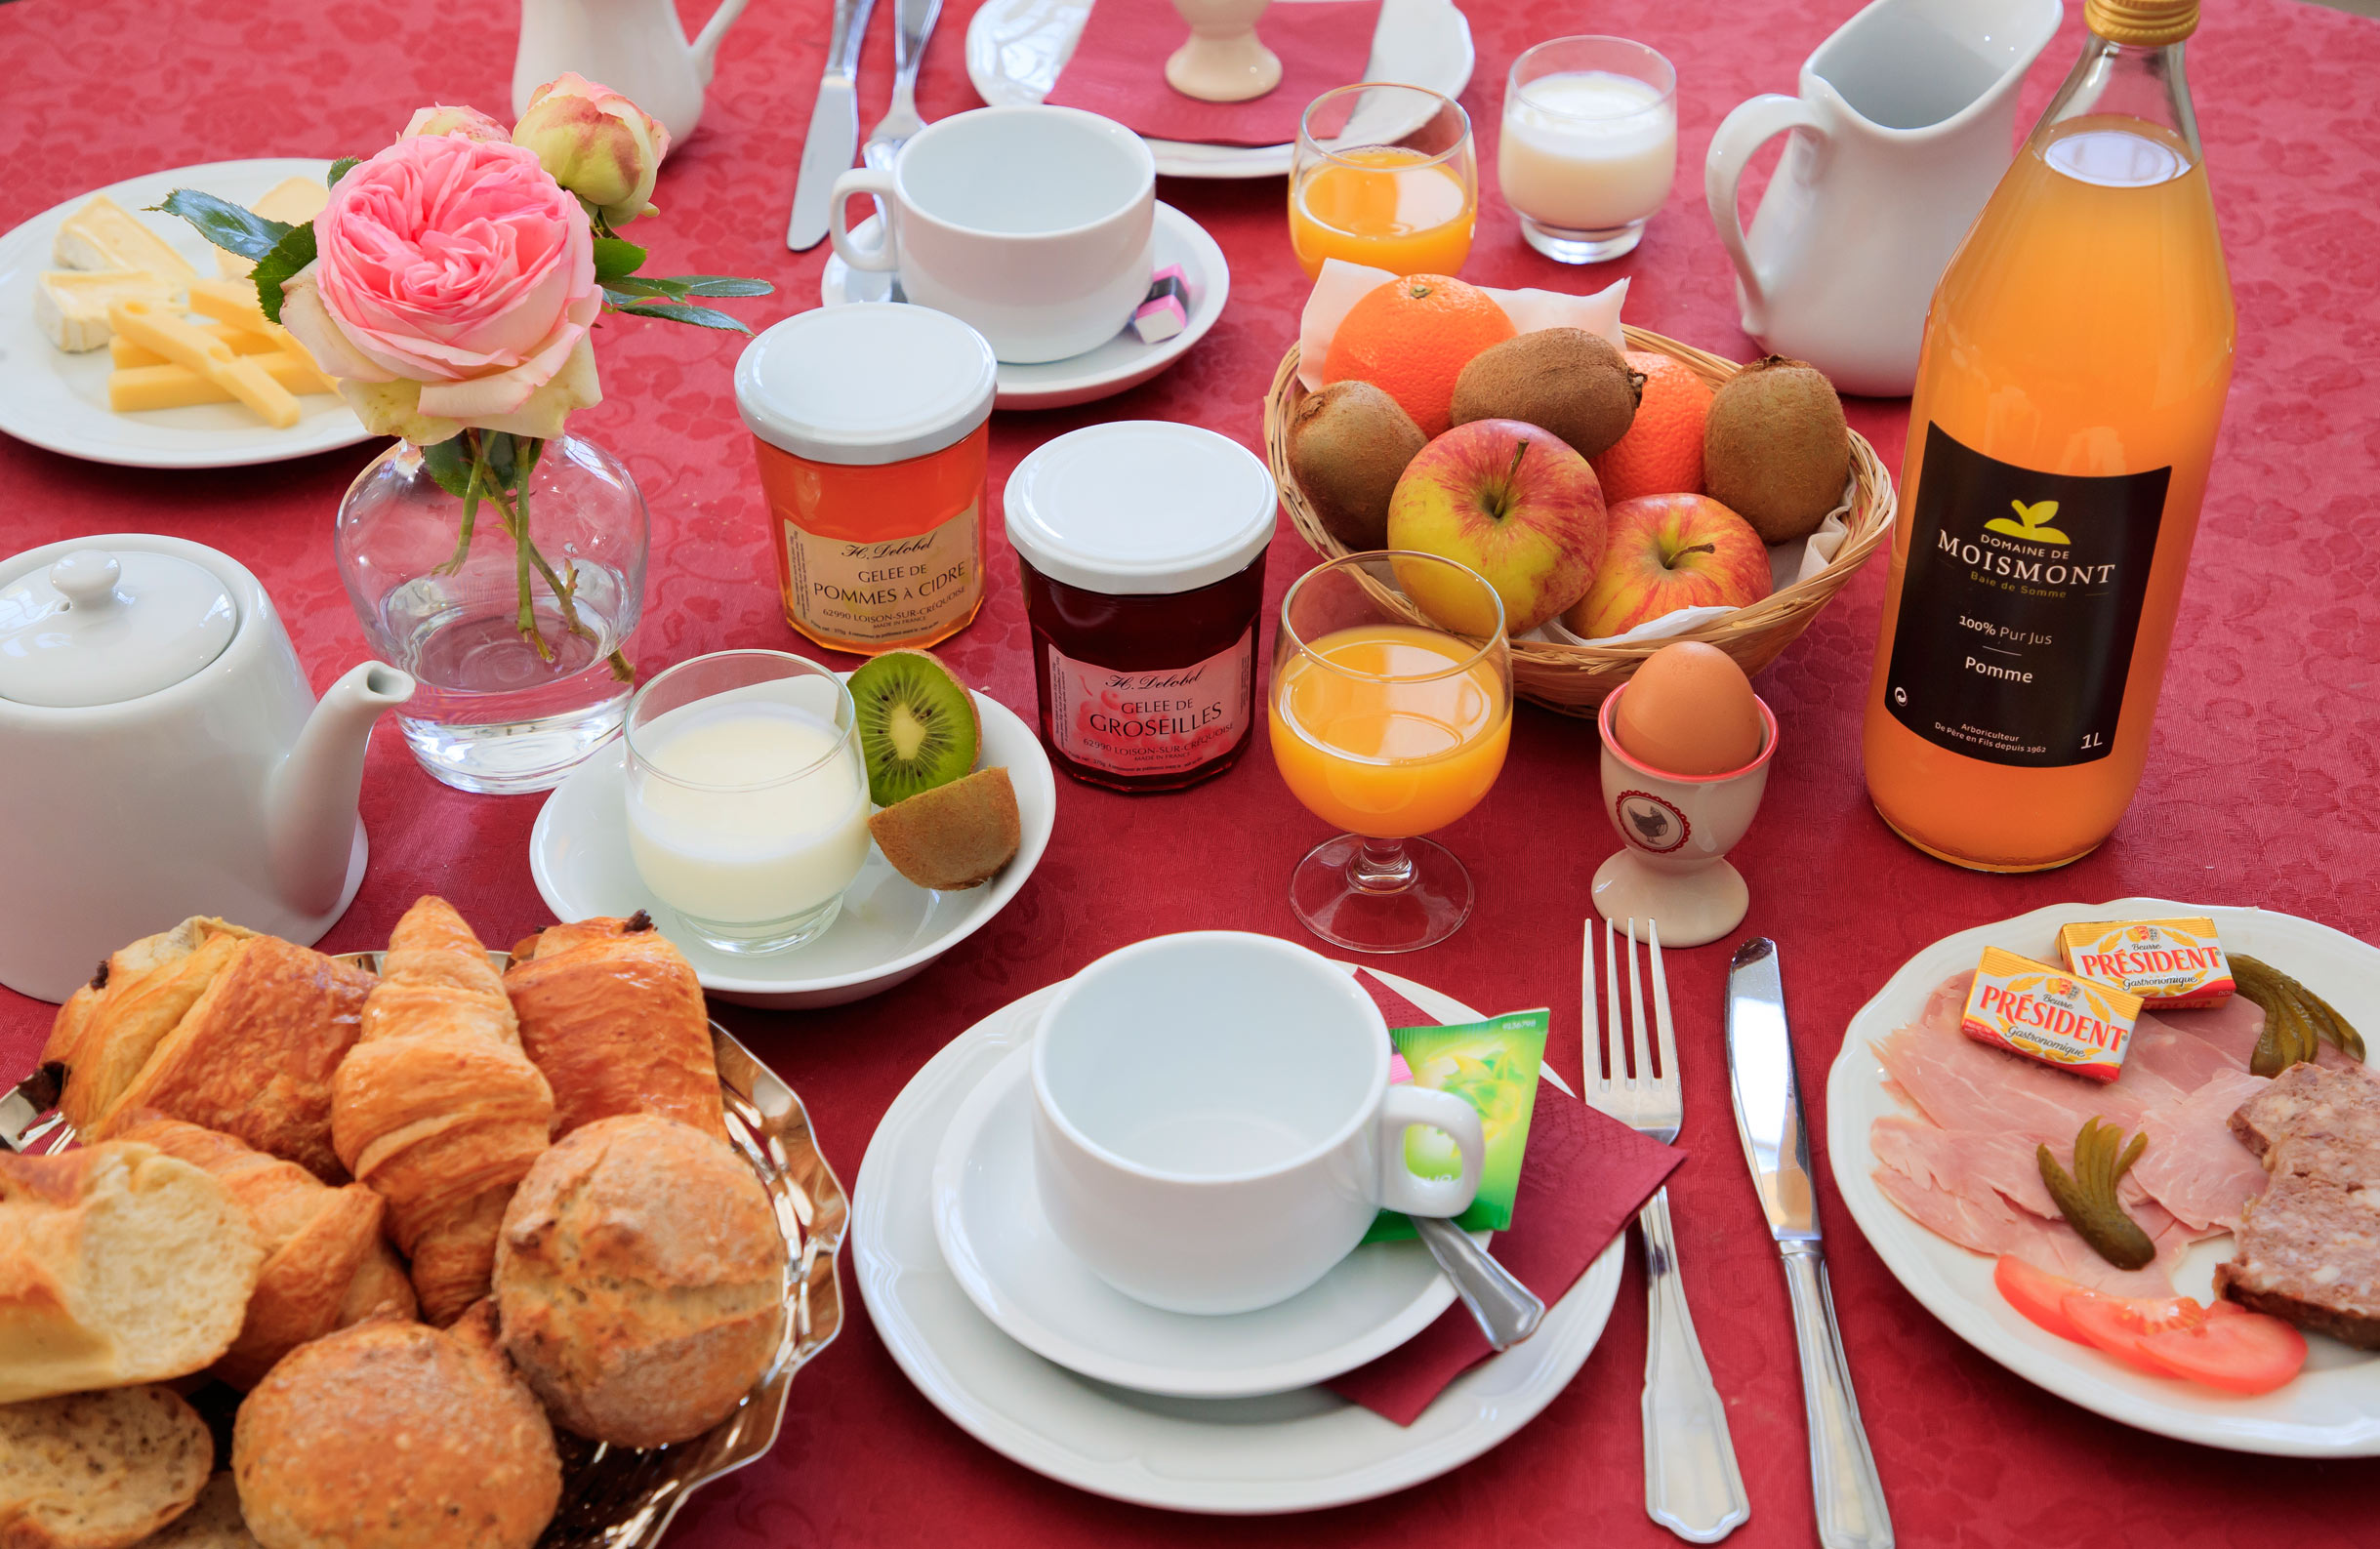 Breakfast at Abbaye-de-Valloires abbey in Argoules, Northern France